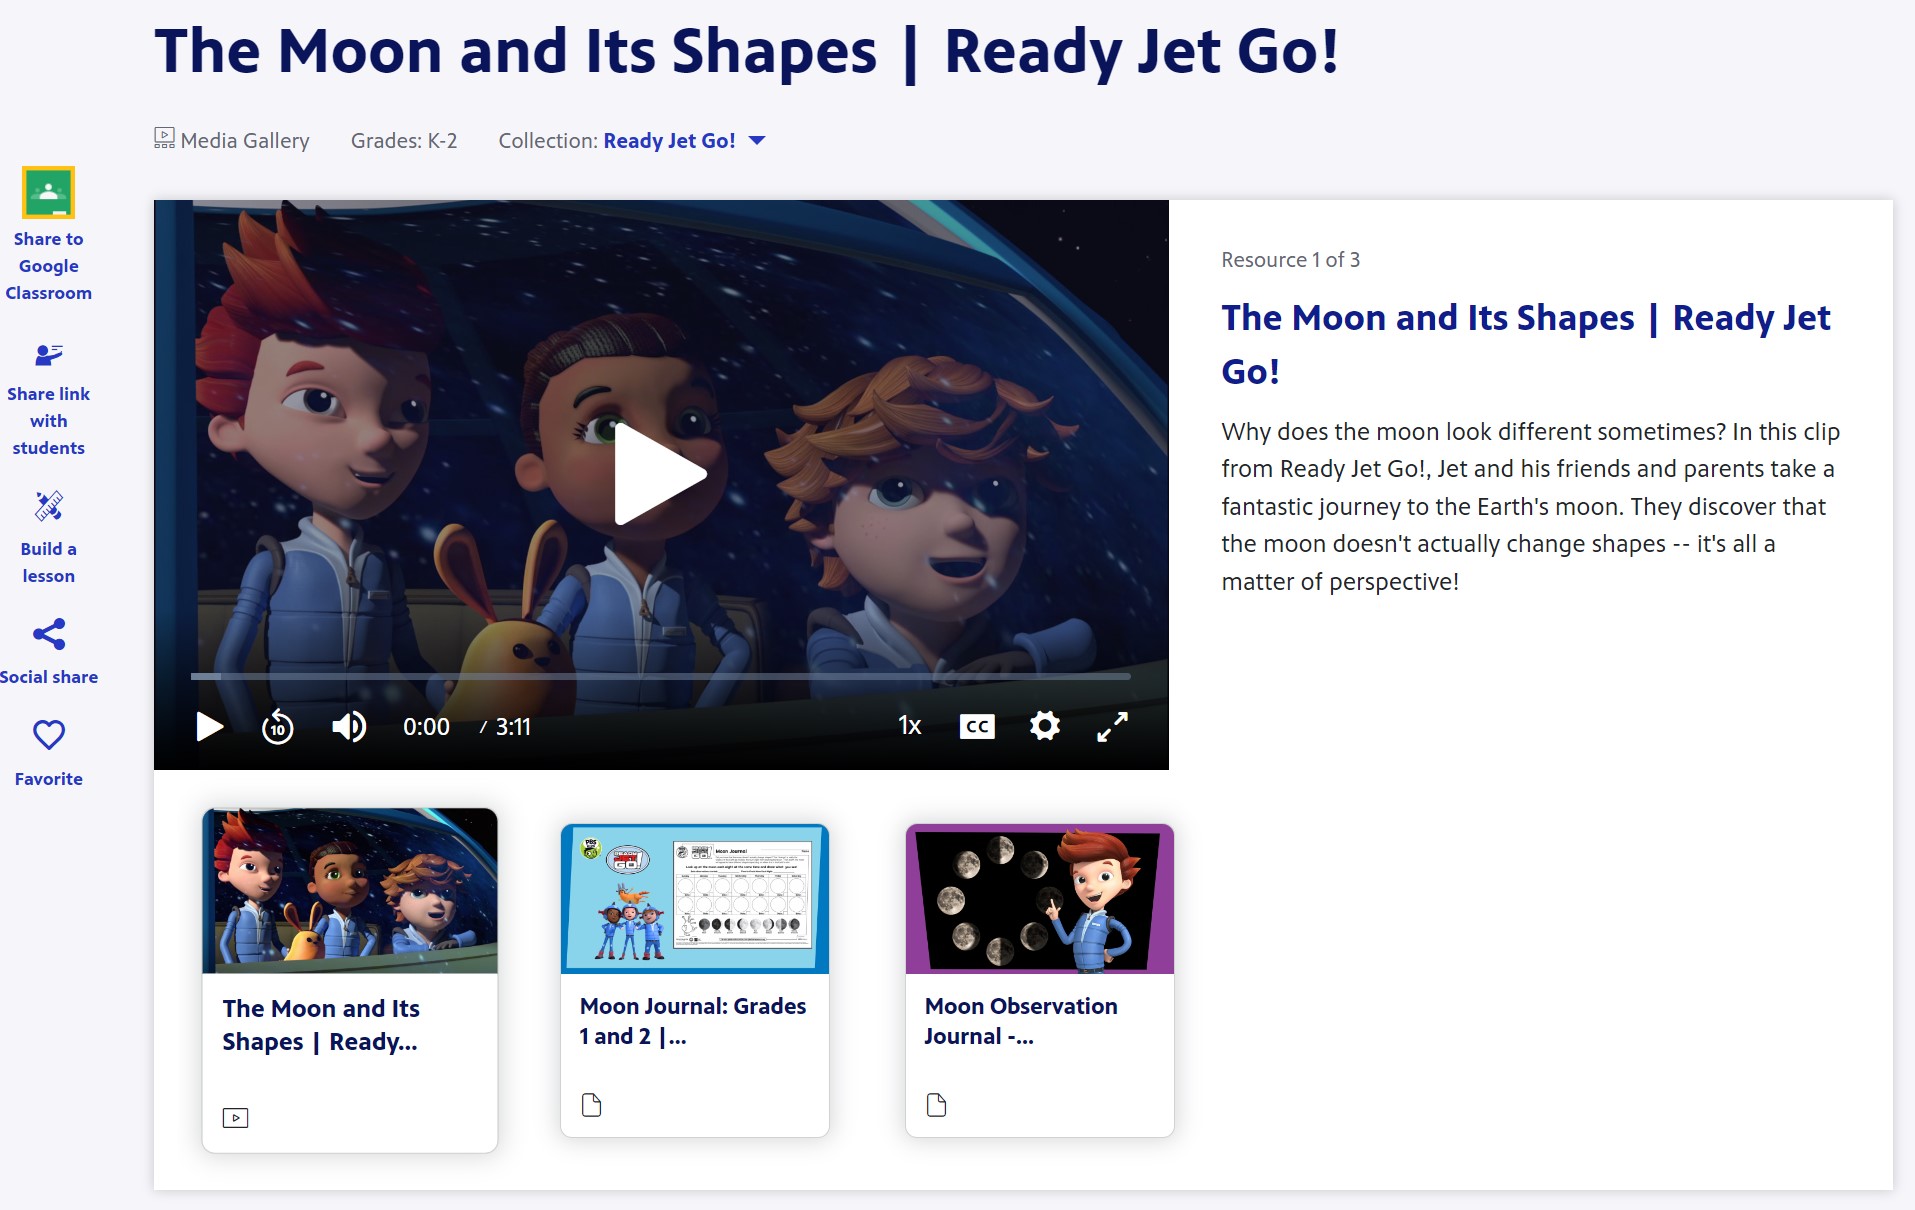 The Moon and Its Shapes | Ready Jet Go!